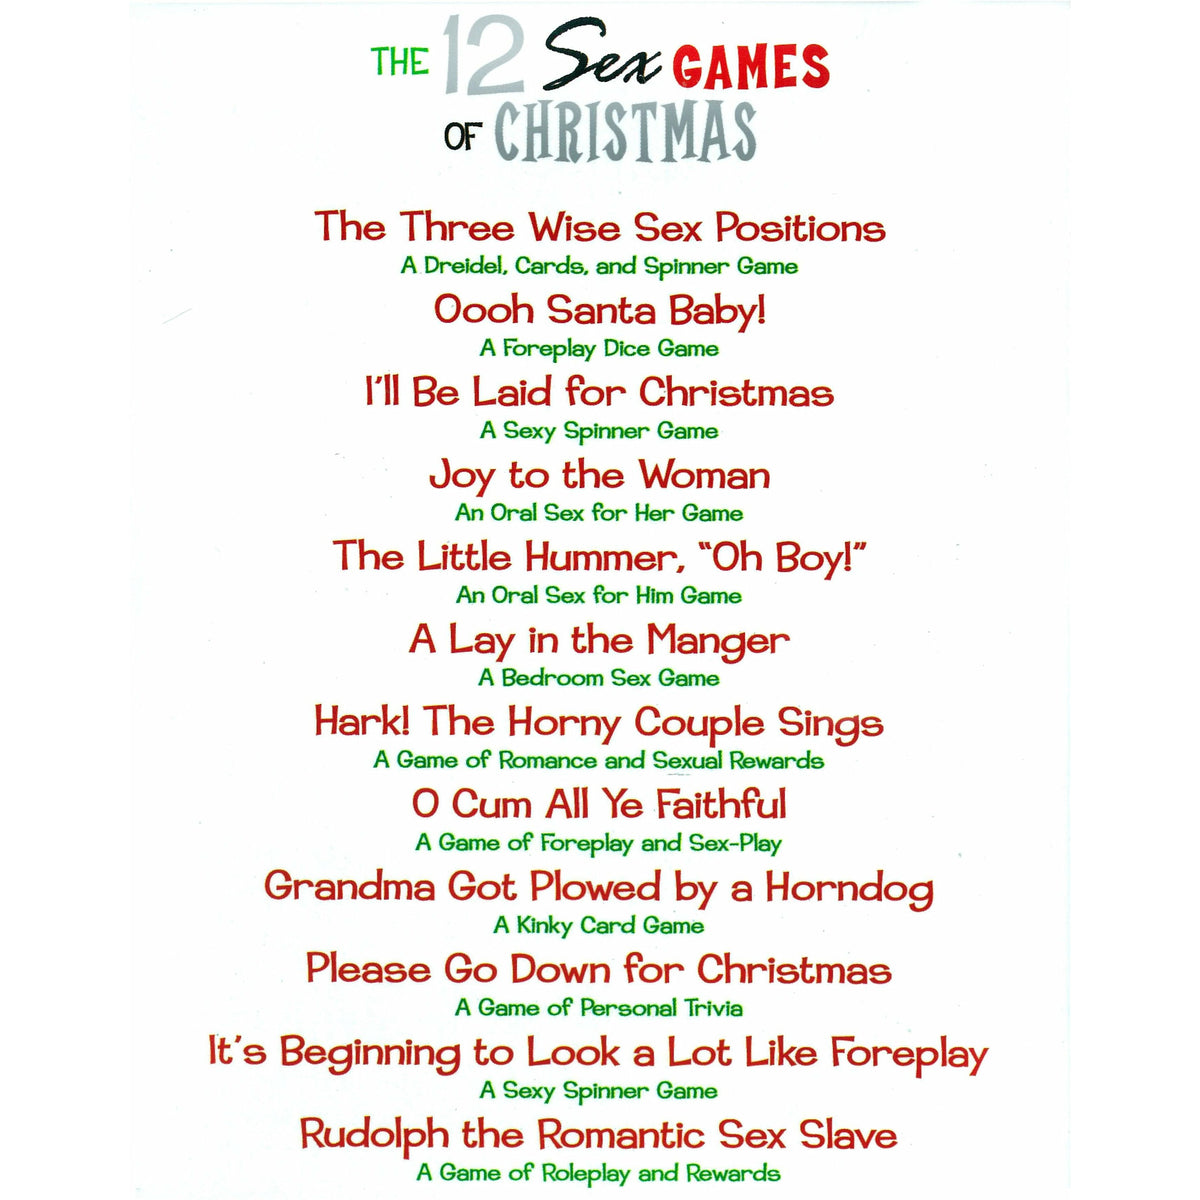 Kheper Games The 12 Sex Games of Christmas